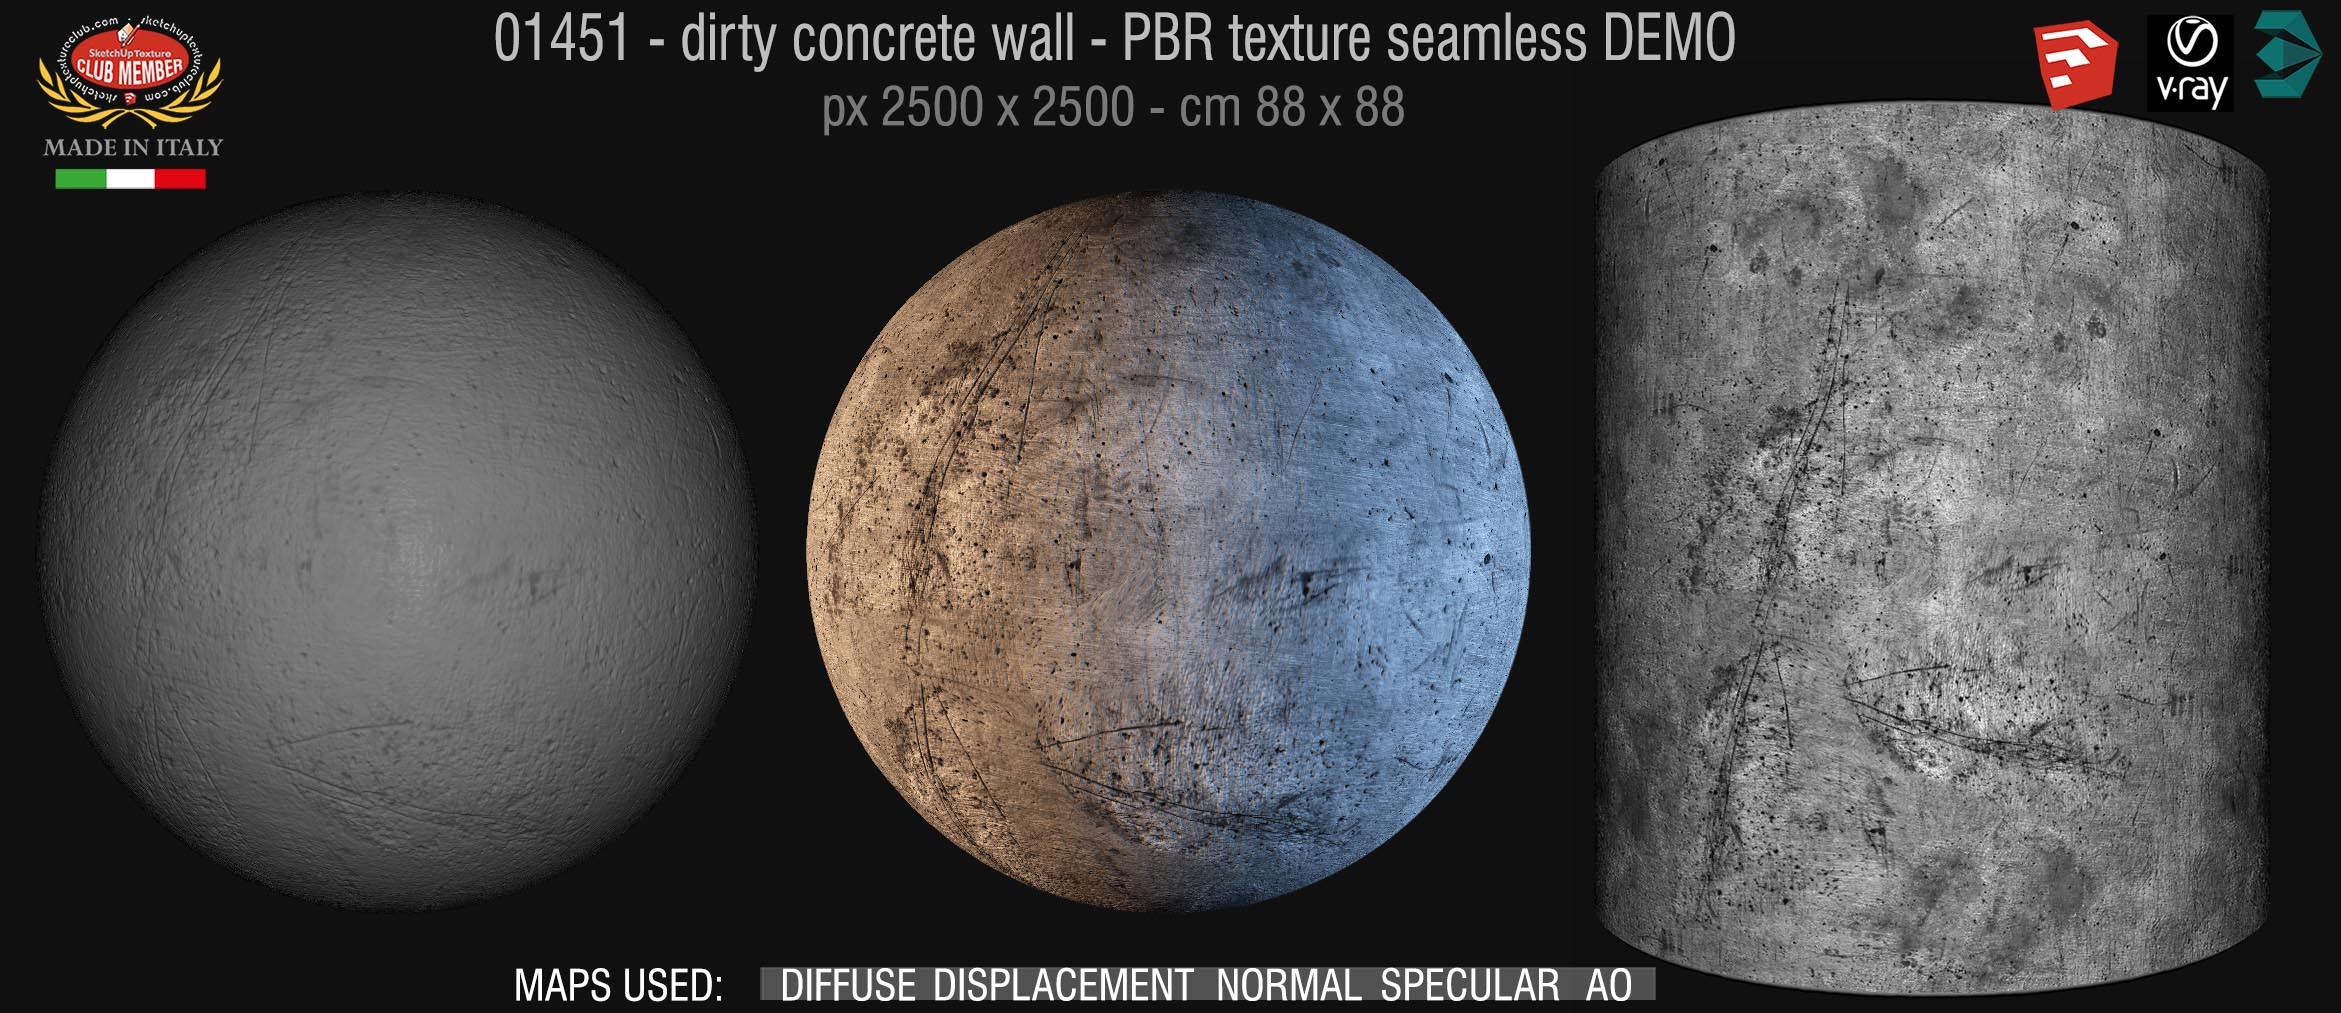 01451 Concrete bare dirty wall PBR texture seamless DEMO